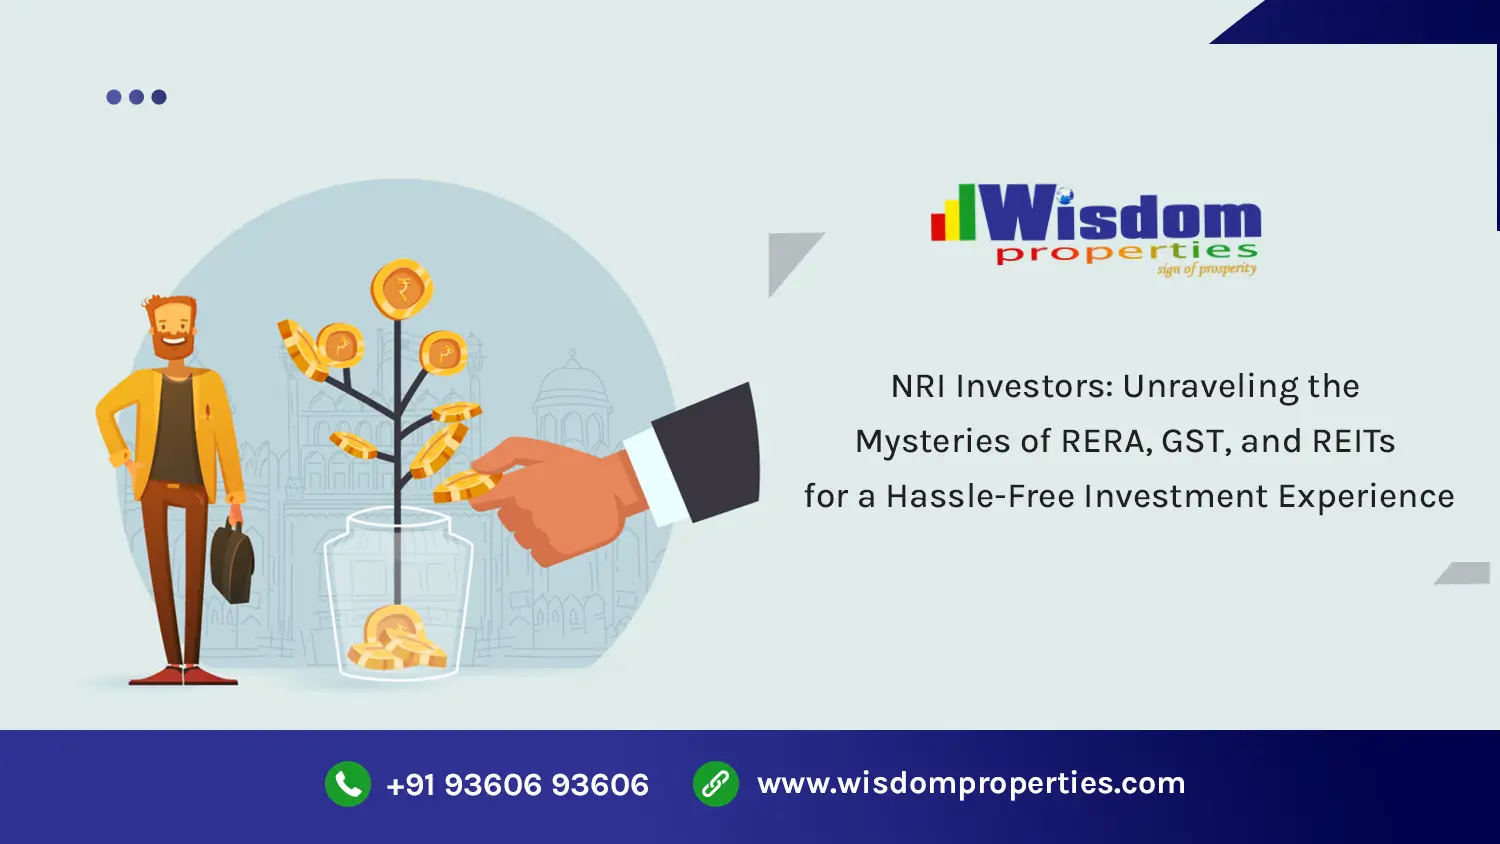 NRI Investors: Unraveling the Mysteries of RERA, GST, and REITs for a Hassle-Free Investment Experience